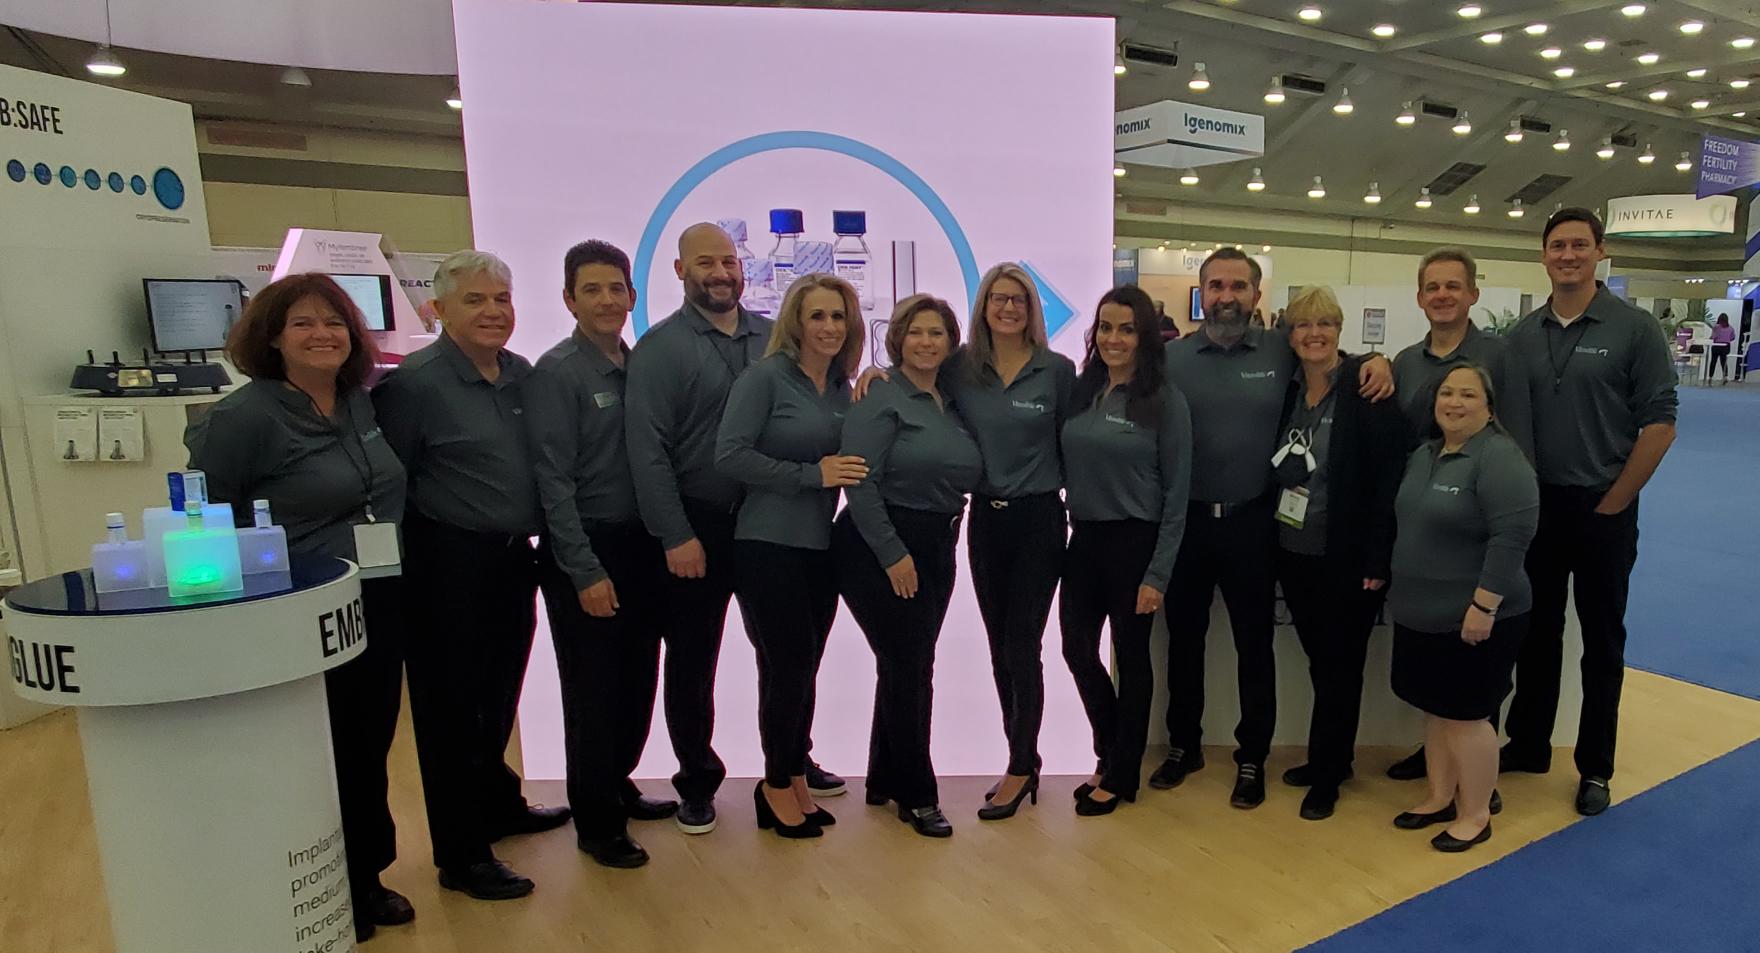 The ASRM team and booth_2021